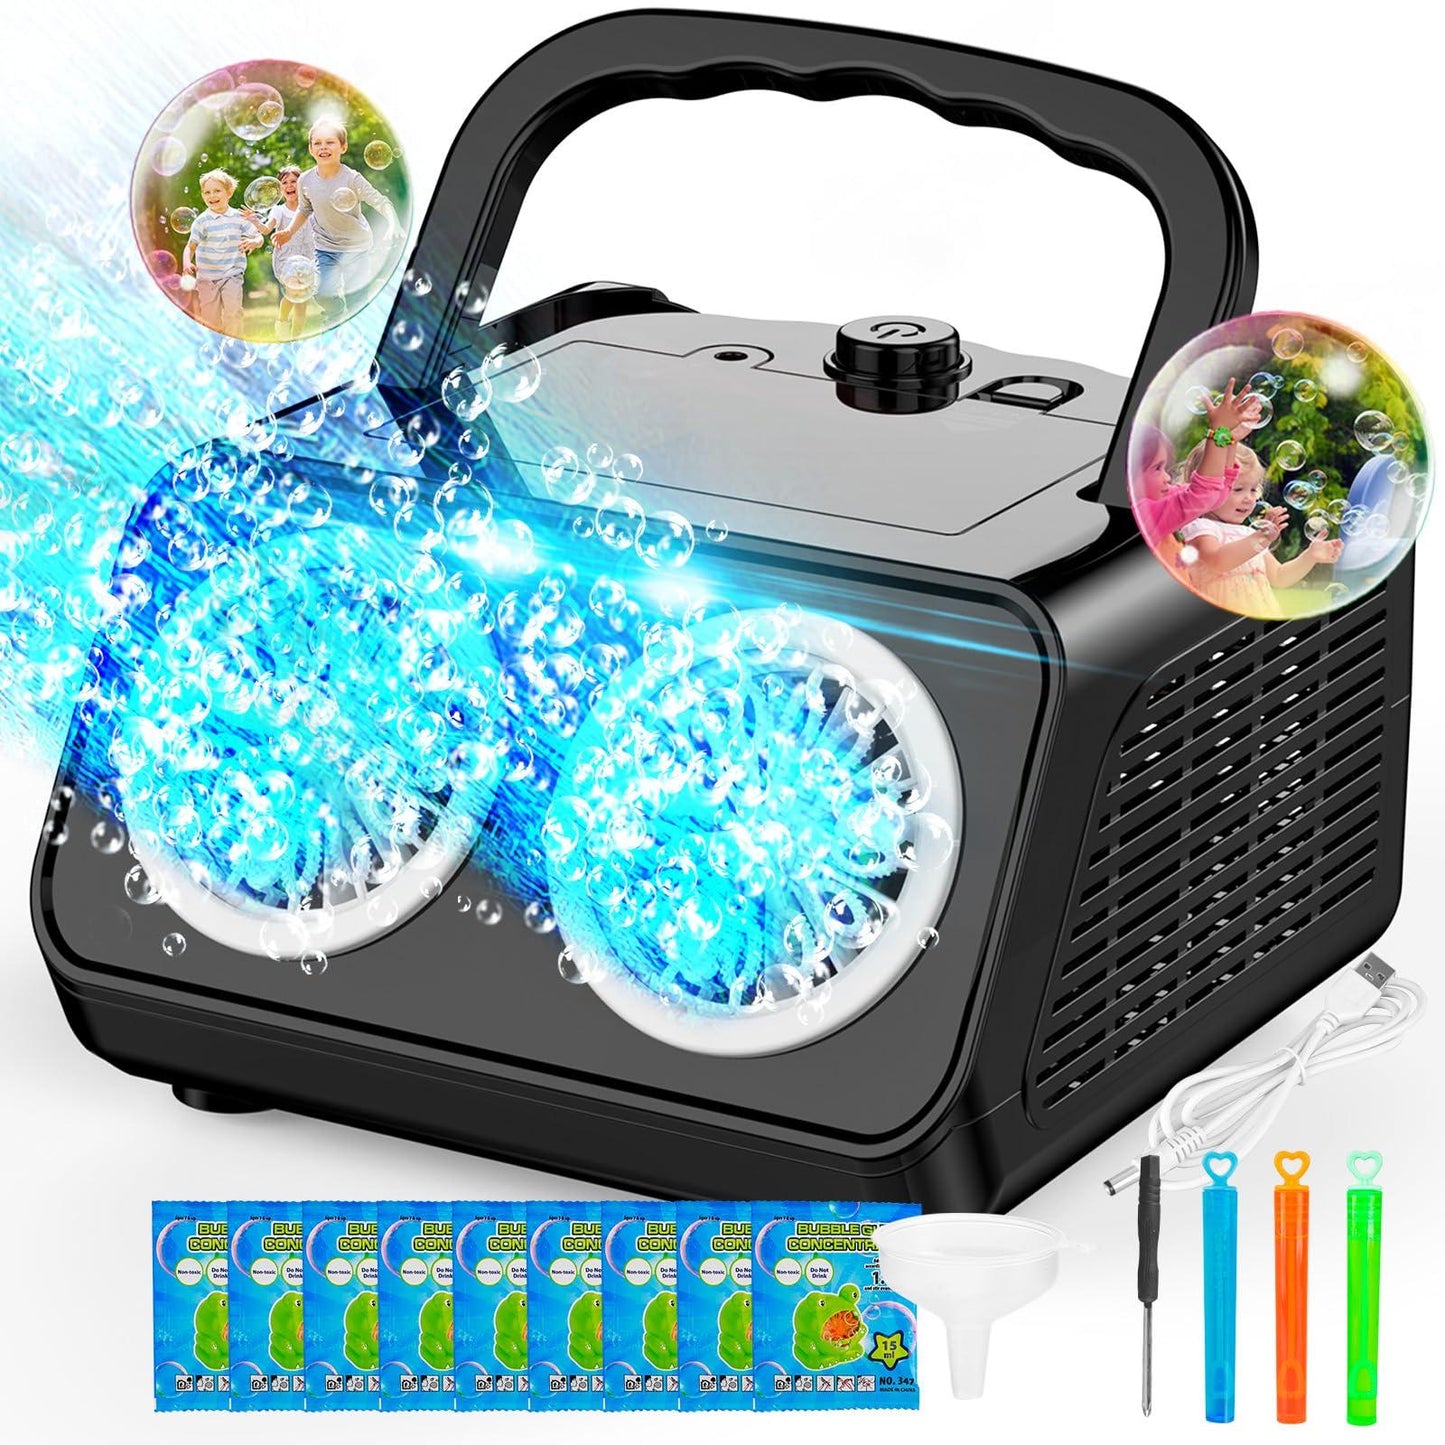 SHCKE Automatic Bubble Machine Upgrade Bubble Blower with 2 Fans, 20000+ Bubbles Per Minute Bubbles for Kids Portable Bubble Maker Operated by Plugin or Batteries for Indoor Outdoor Birthday Party - CookCave